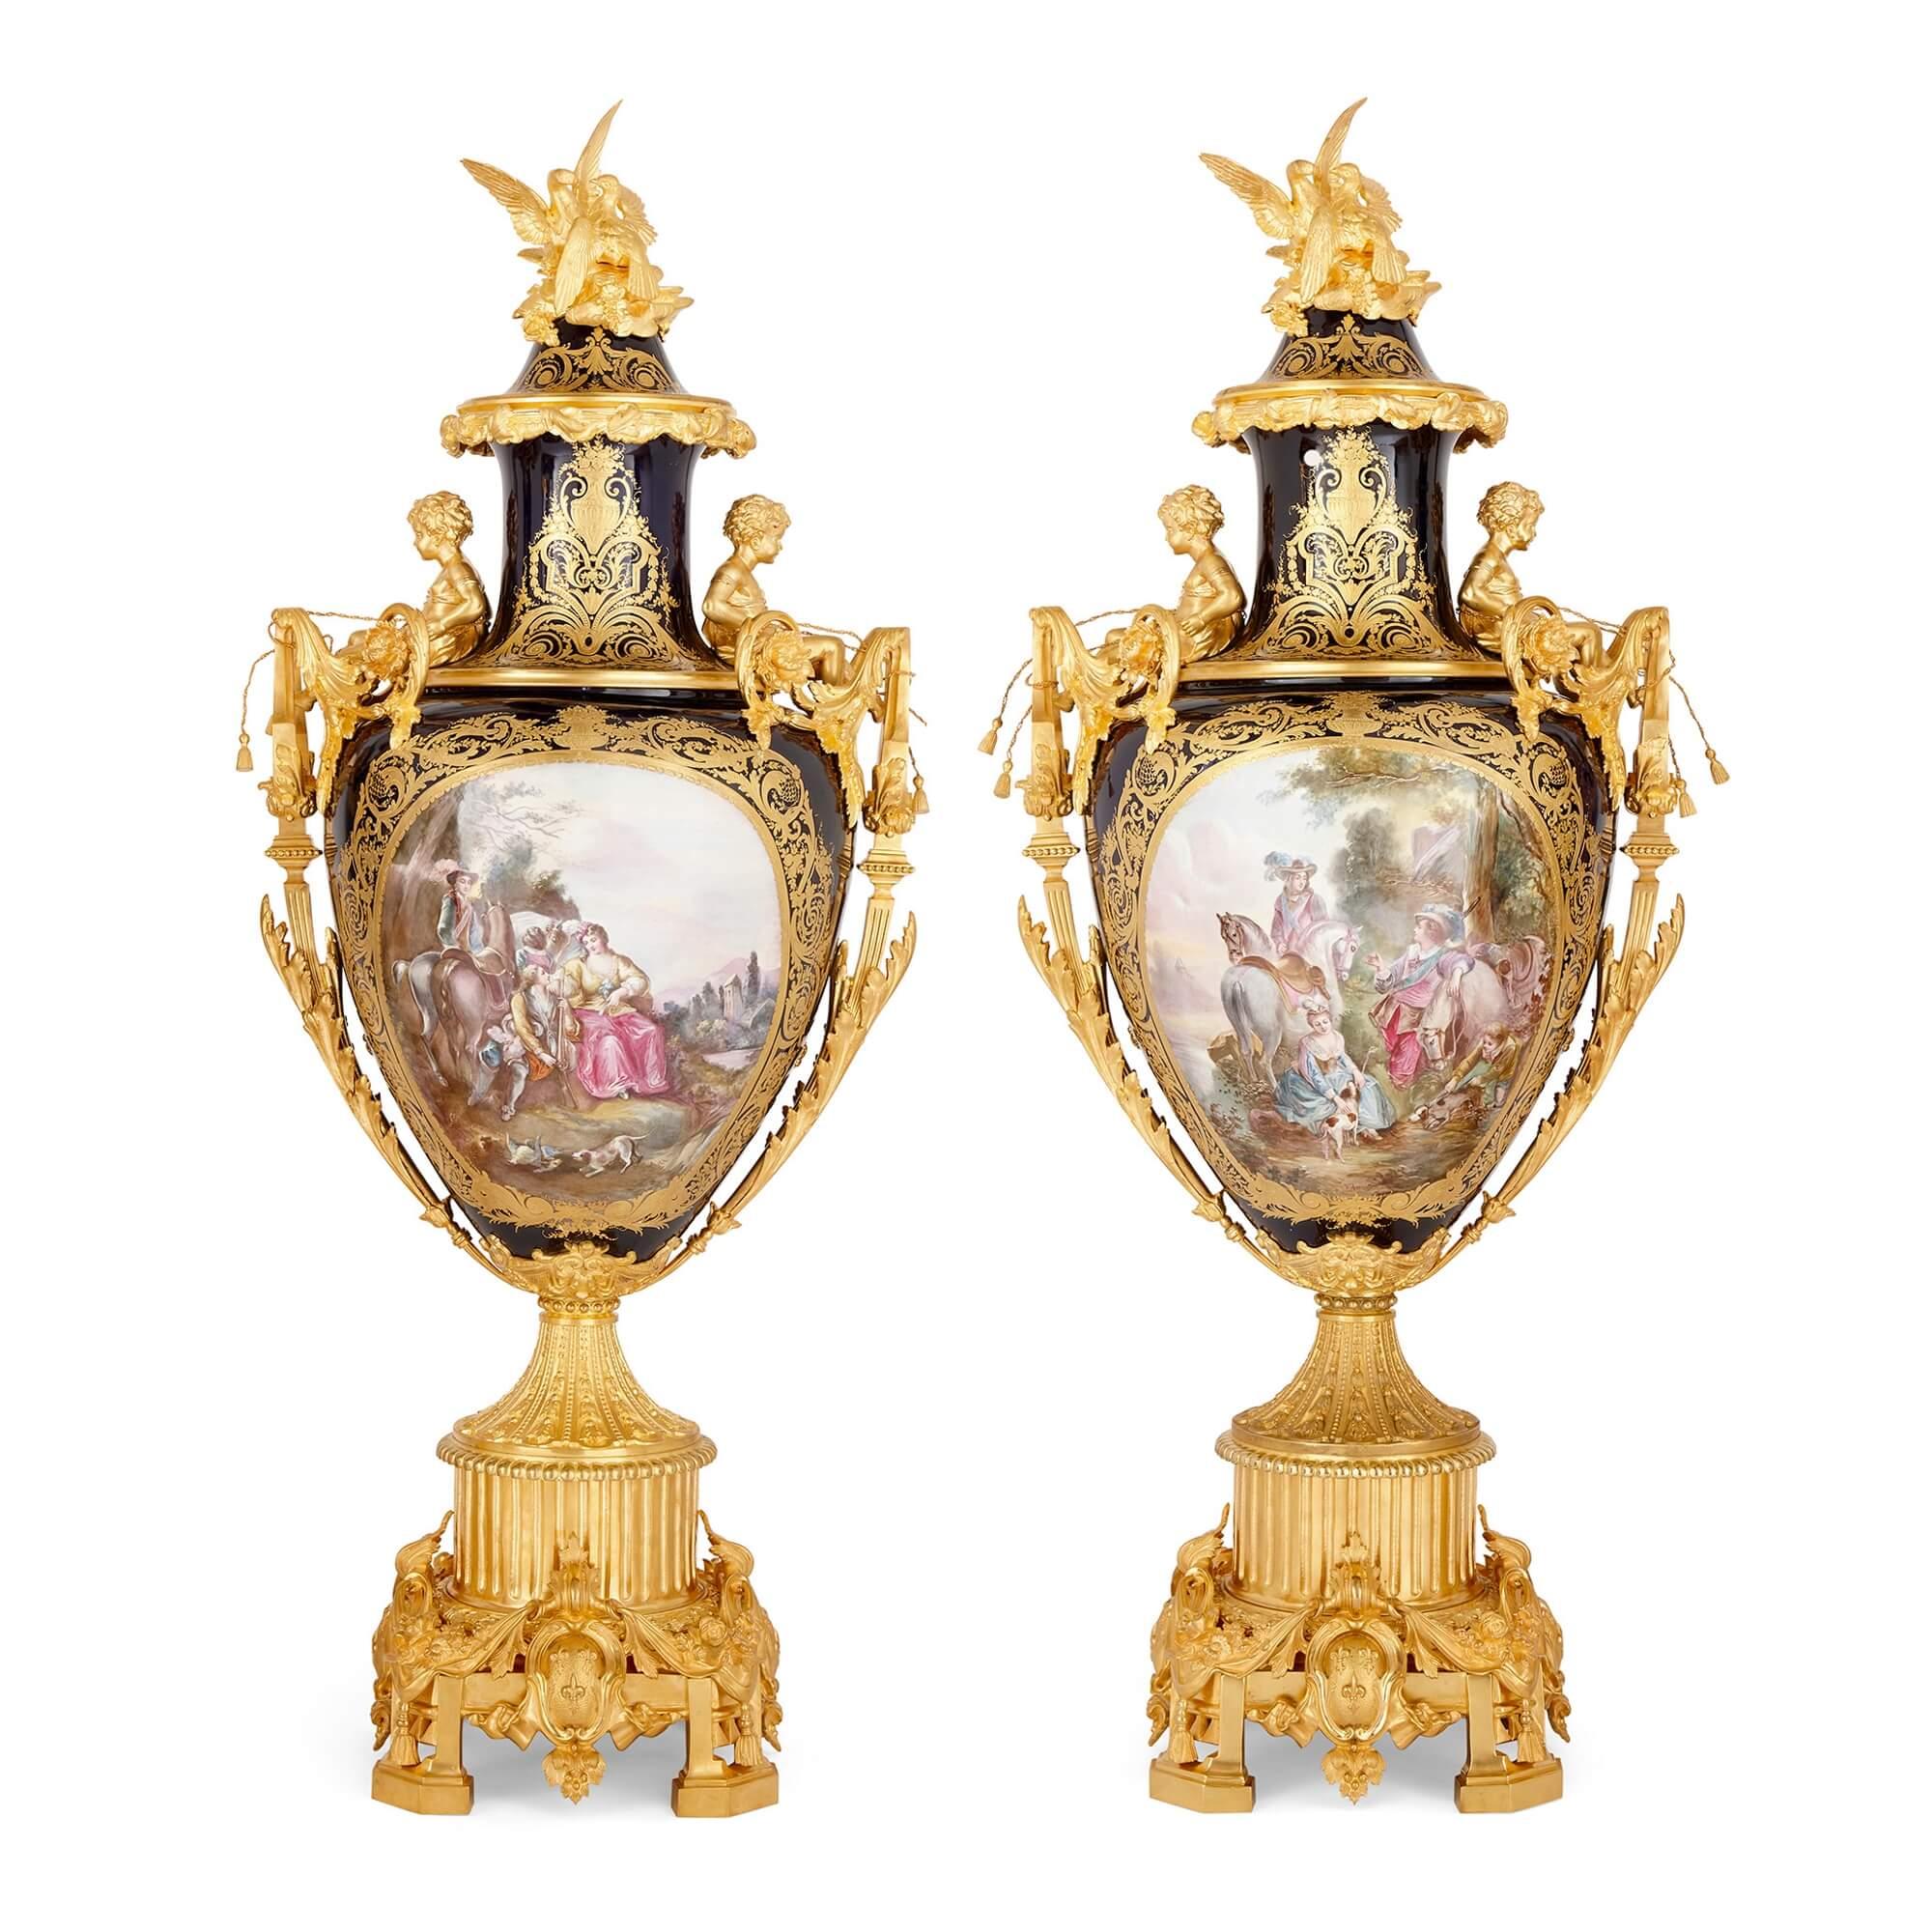 Pair of large gilt-bronze mounted Sèvres-style porcelain vases with pedestals
French, Early 20th century
Measures: Vases: height 141cm, width 60cm, depth 44cm
Stands: height 66cm, width 43cm, depth 43cm

Each of the three vases is of ovoid